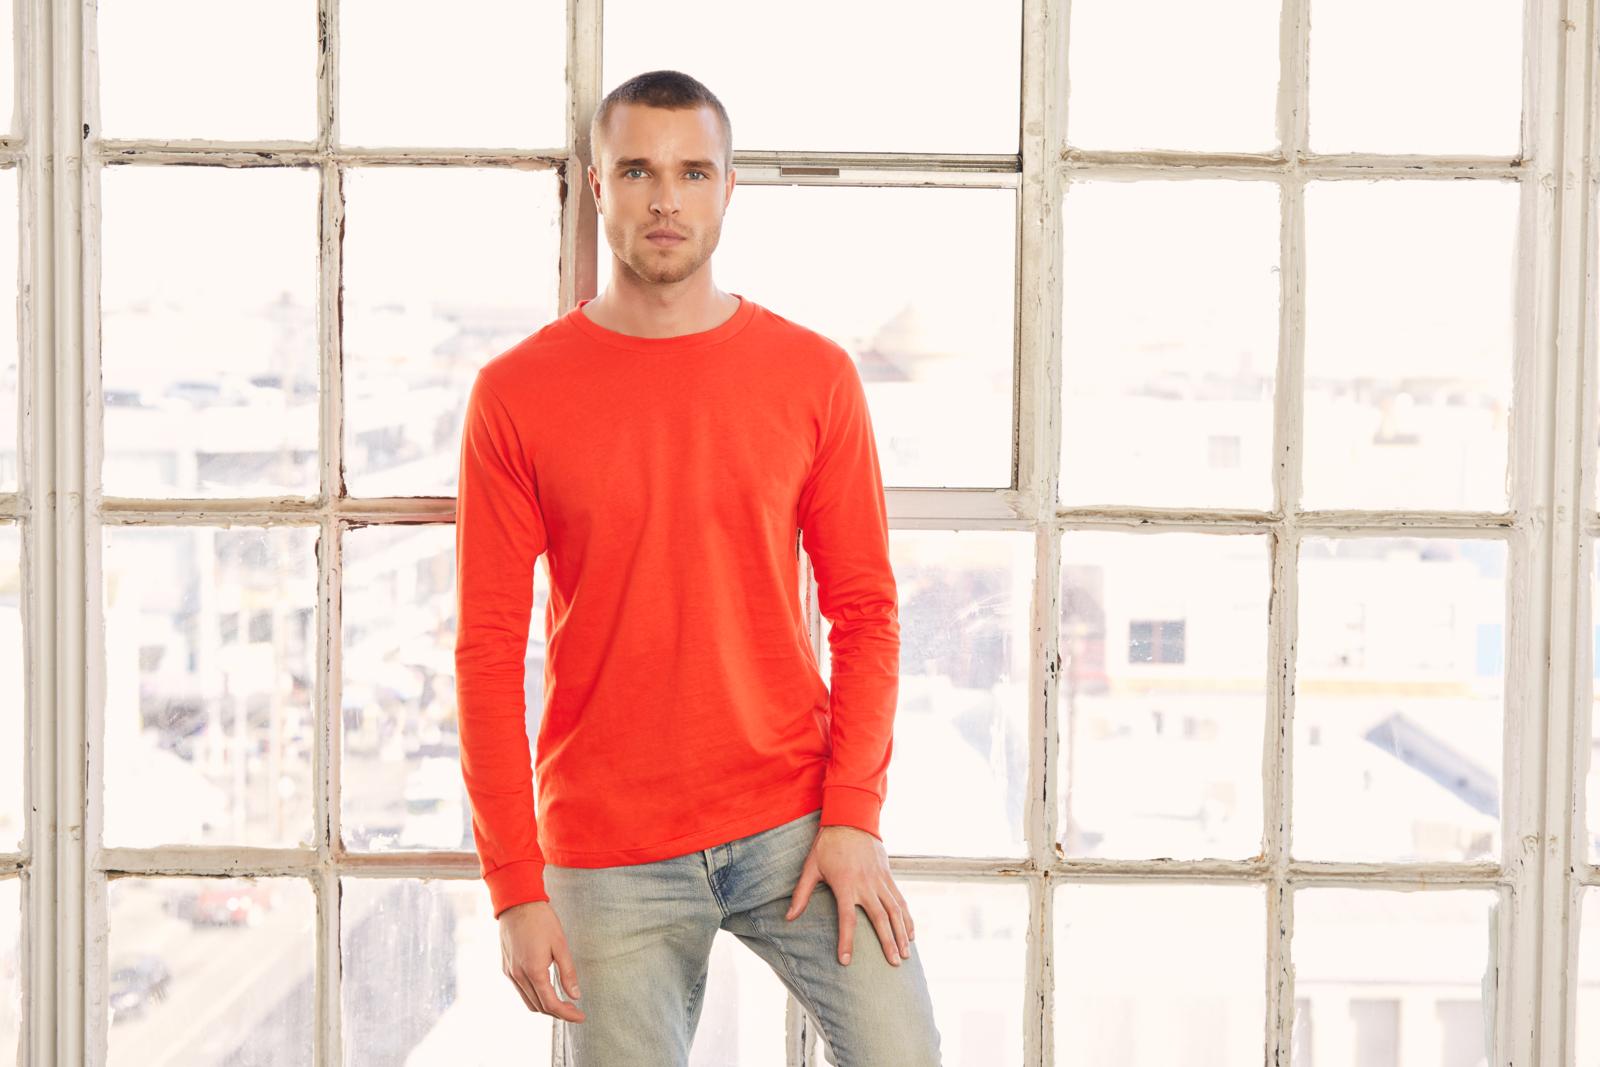 Man modeling the Bella + Canvas 3501 Unisex Jersey Long-Sleeve T-Shirt in the color “poppy” 